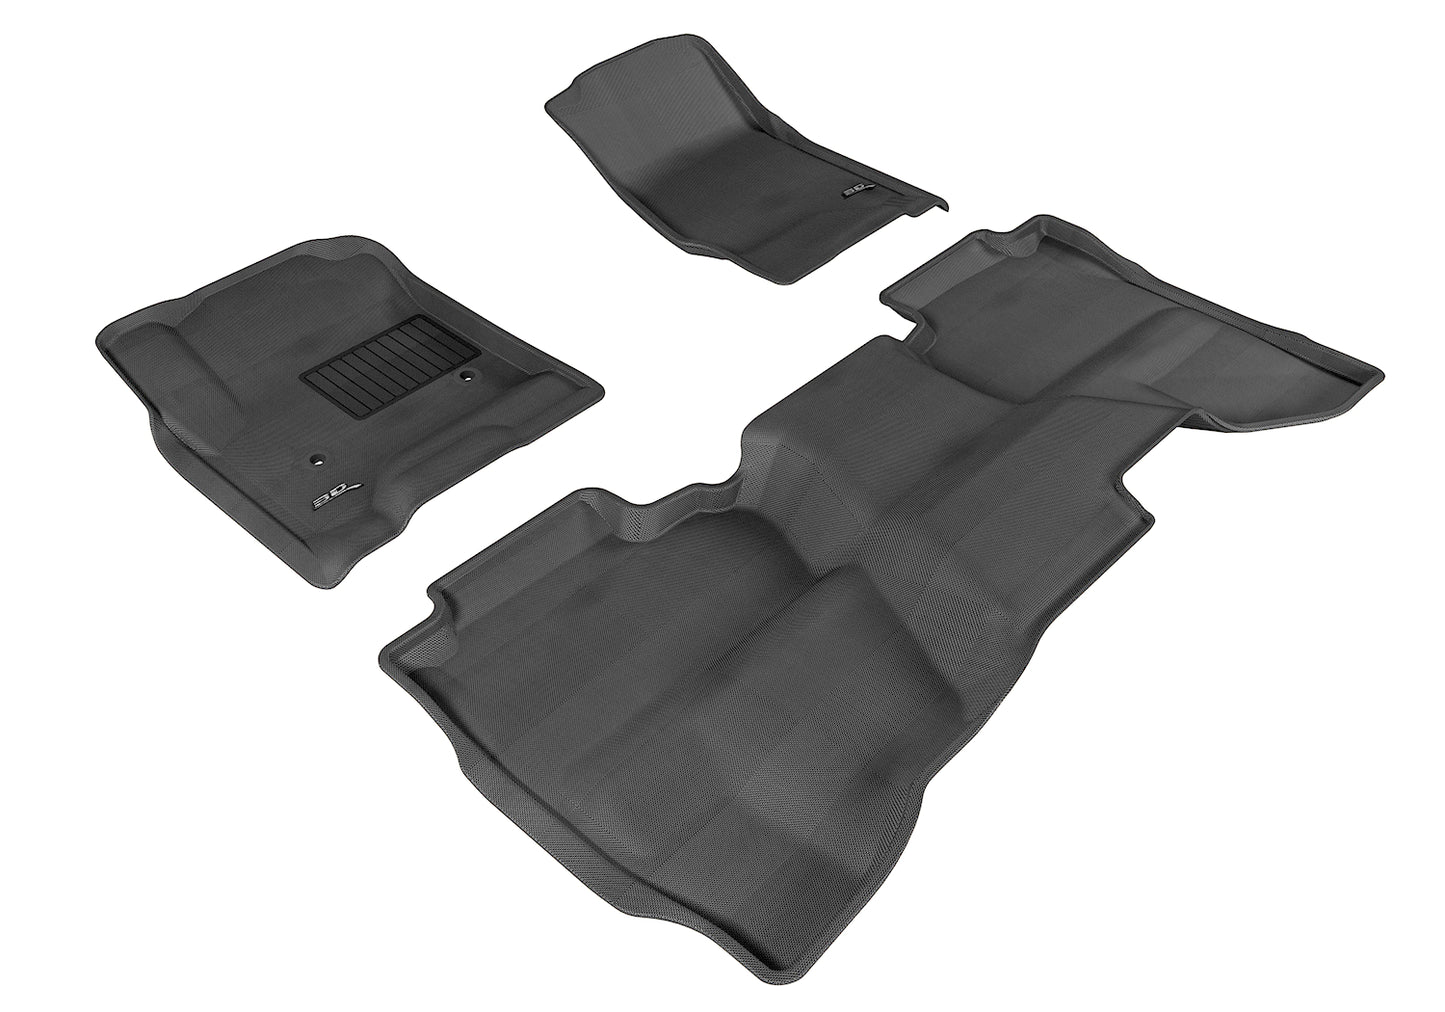 3D MAXpider Custom Fit Floor Liner Black for 2014-2019 GMC SIERRA 1500, Fits Double Cab Only, 2019 Classic Body Only